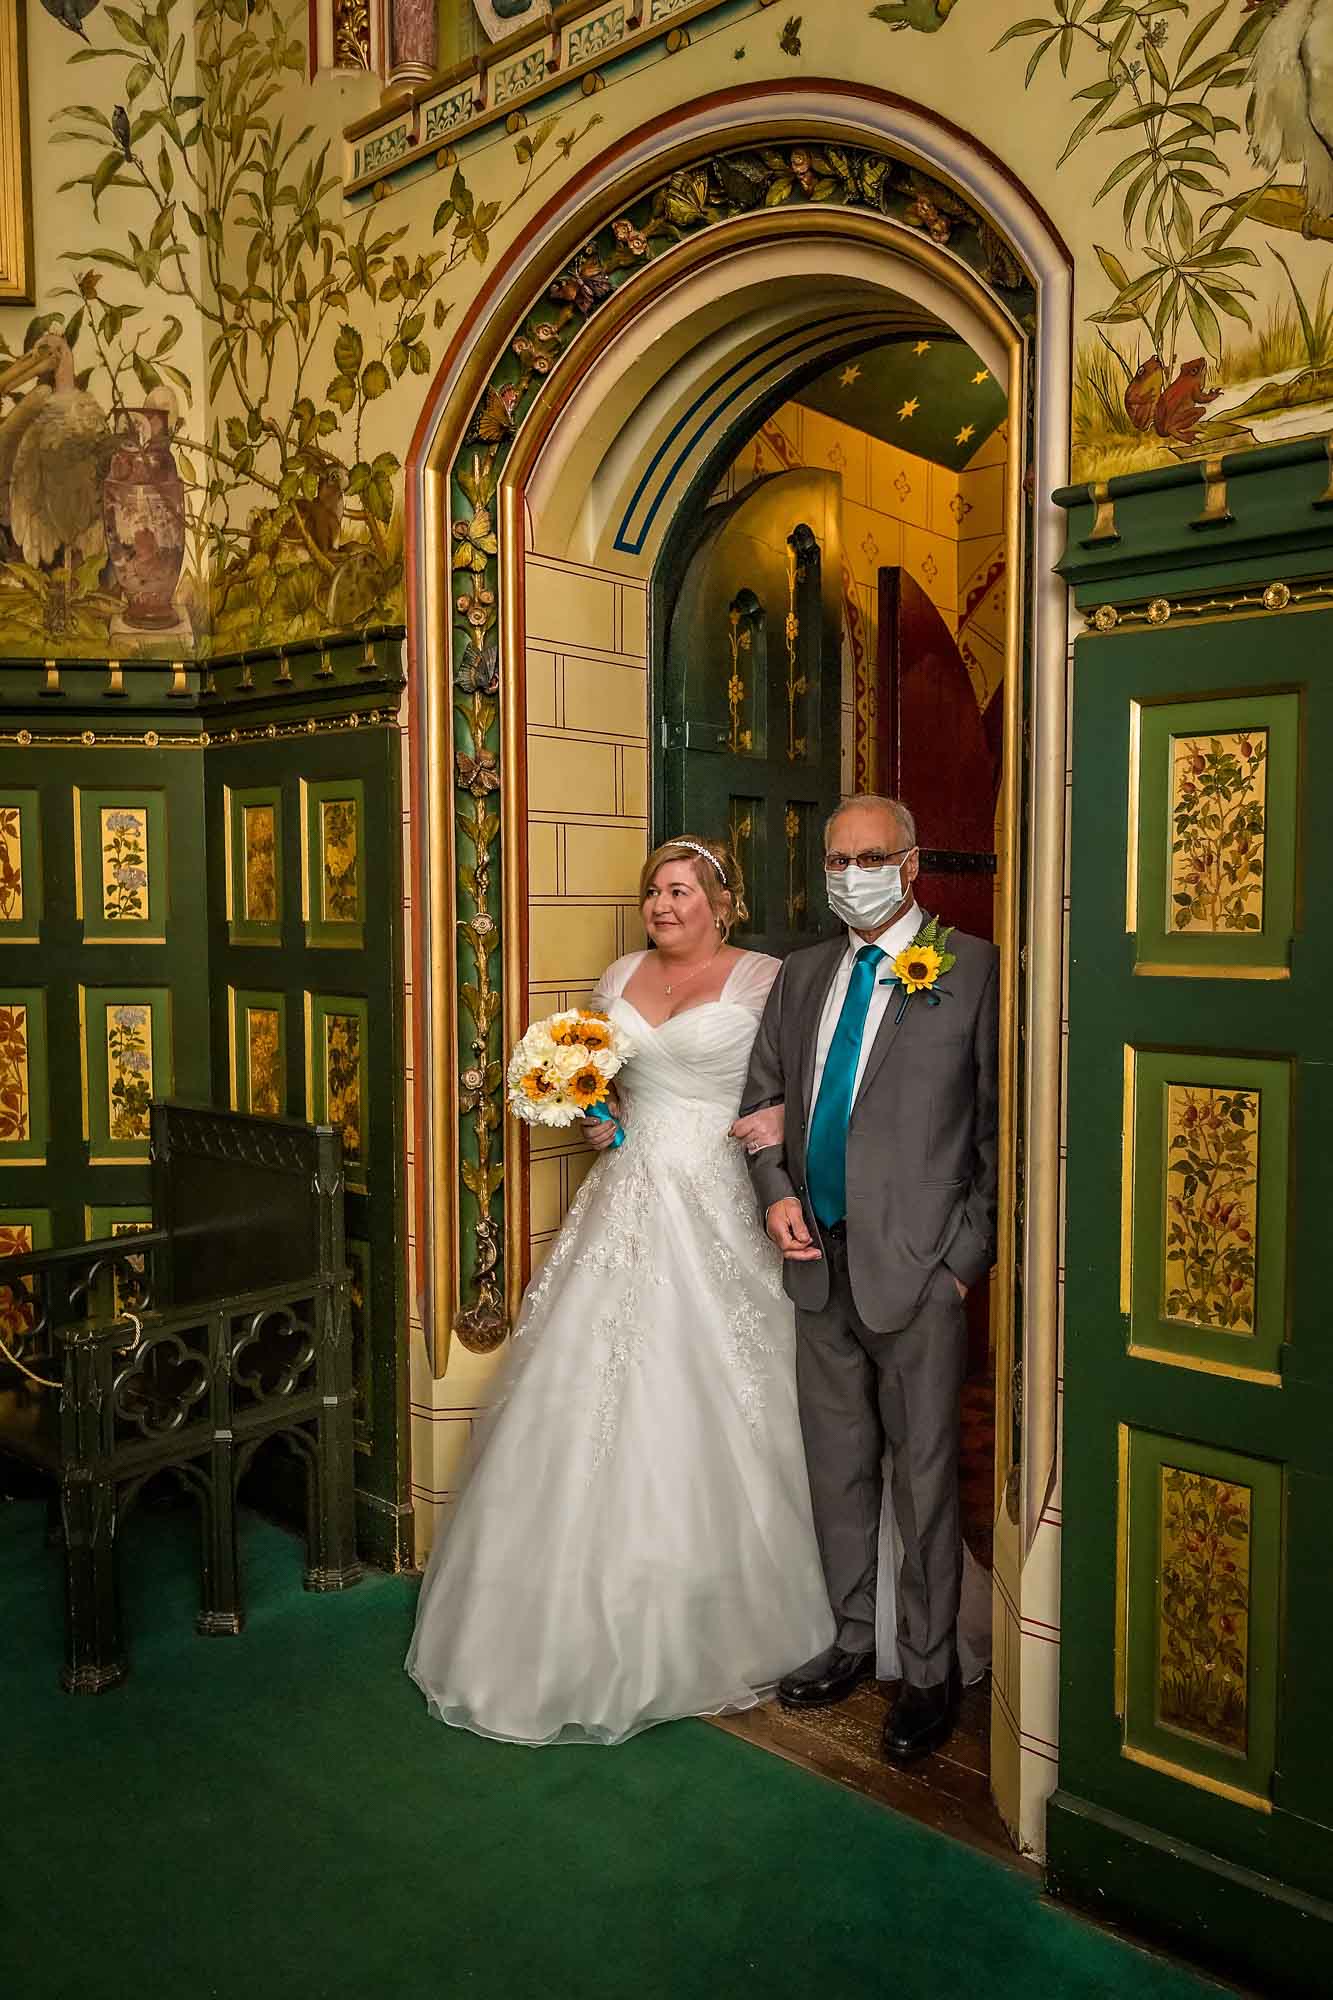 The bride enters the drawing Room at Castell Coch with her COVID-19 masked father